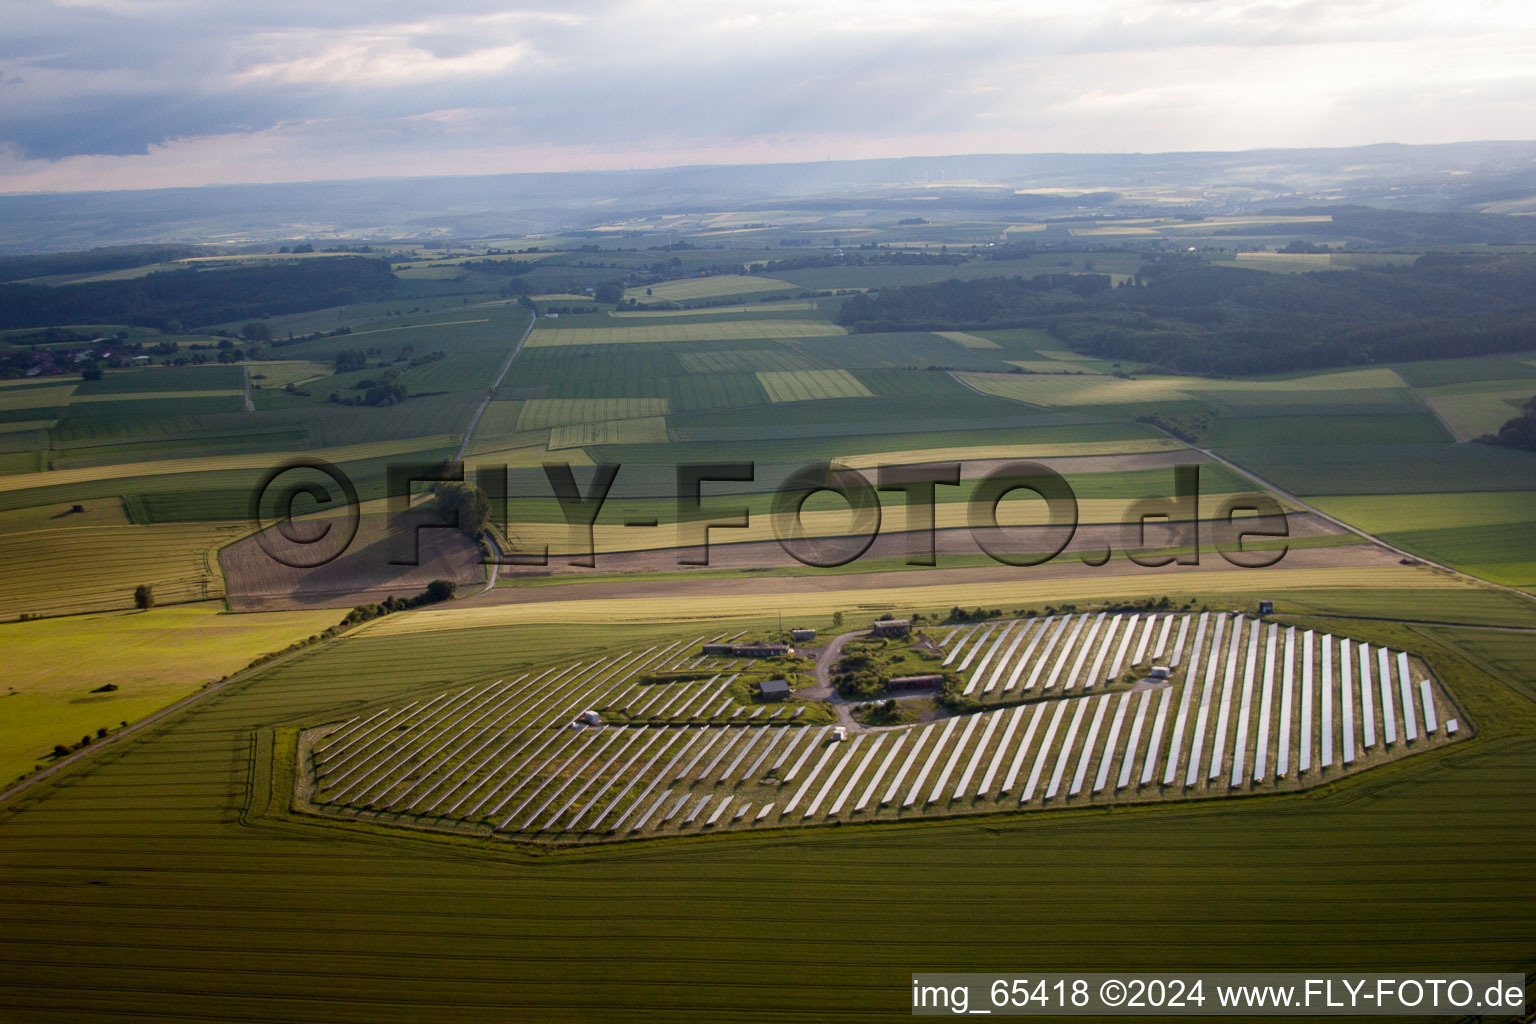 Aerial photograpy of Panel rows of photovoltaic and solar farm or solar power plant in Beverungen in the state North Rhine-Westphalia